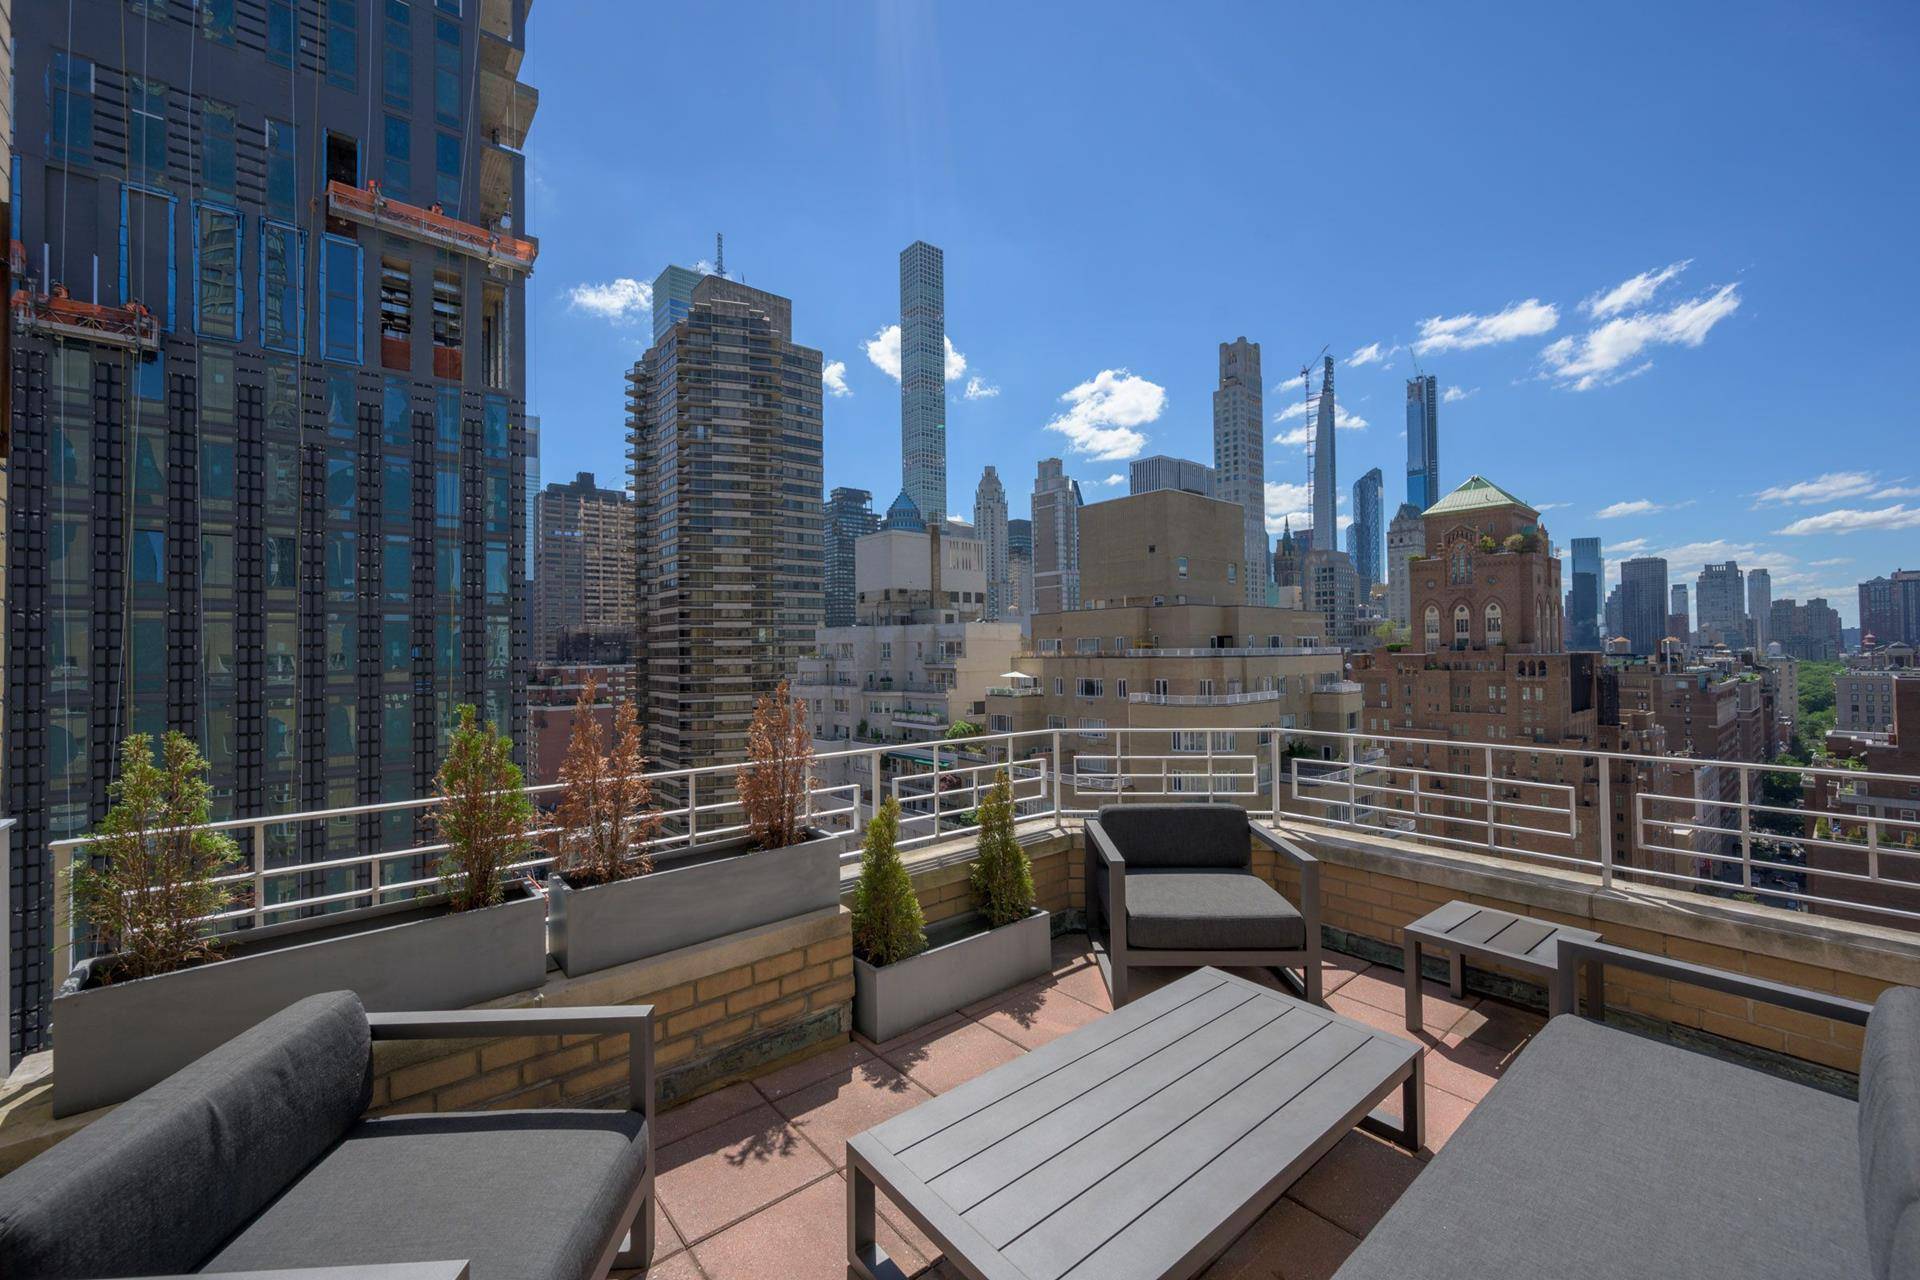 STUNNINGLY RENOVATED Penthouse 2 Beds, 2 Baths w 3 Beautiful Terraces with Open City Views, Tree Top Central Park amp ; East River Views with Endless Natural Light Throughout.